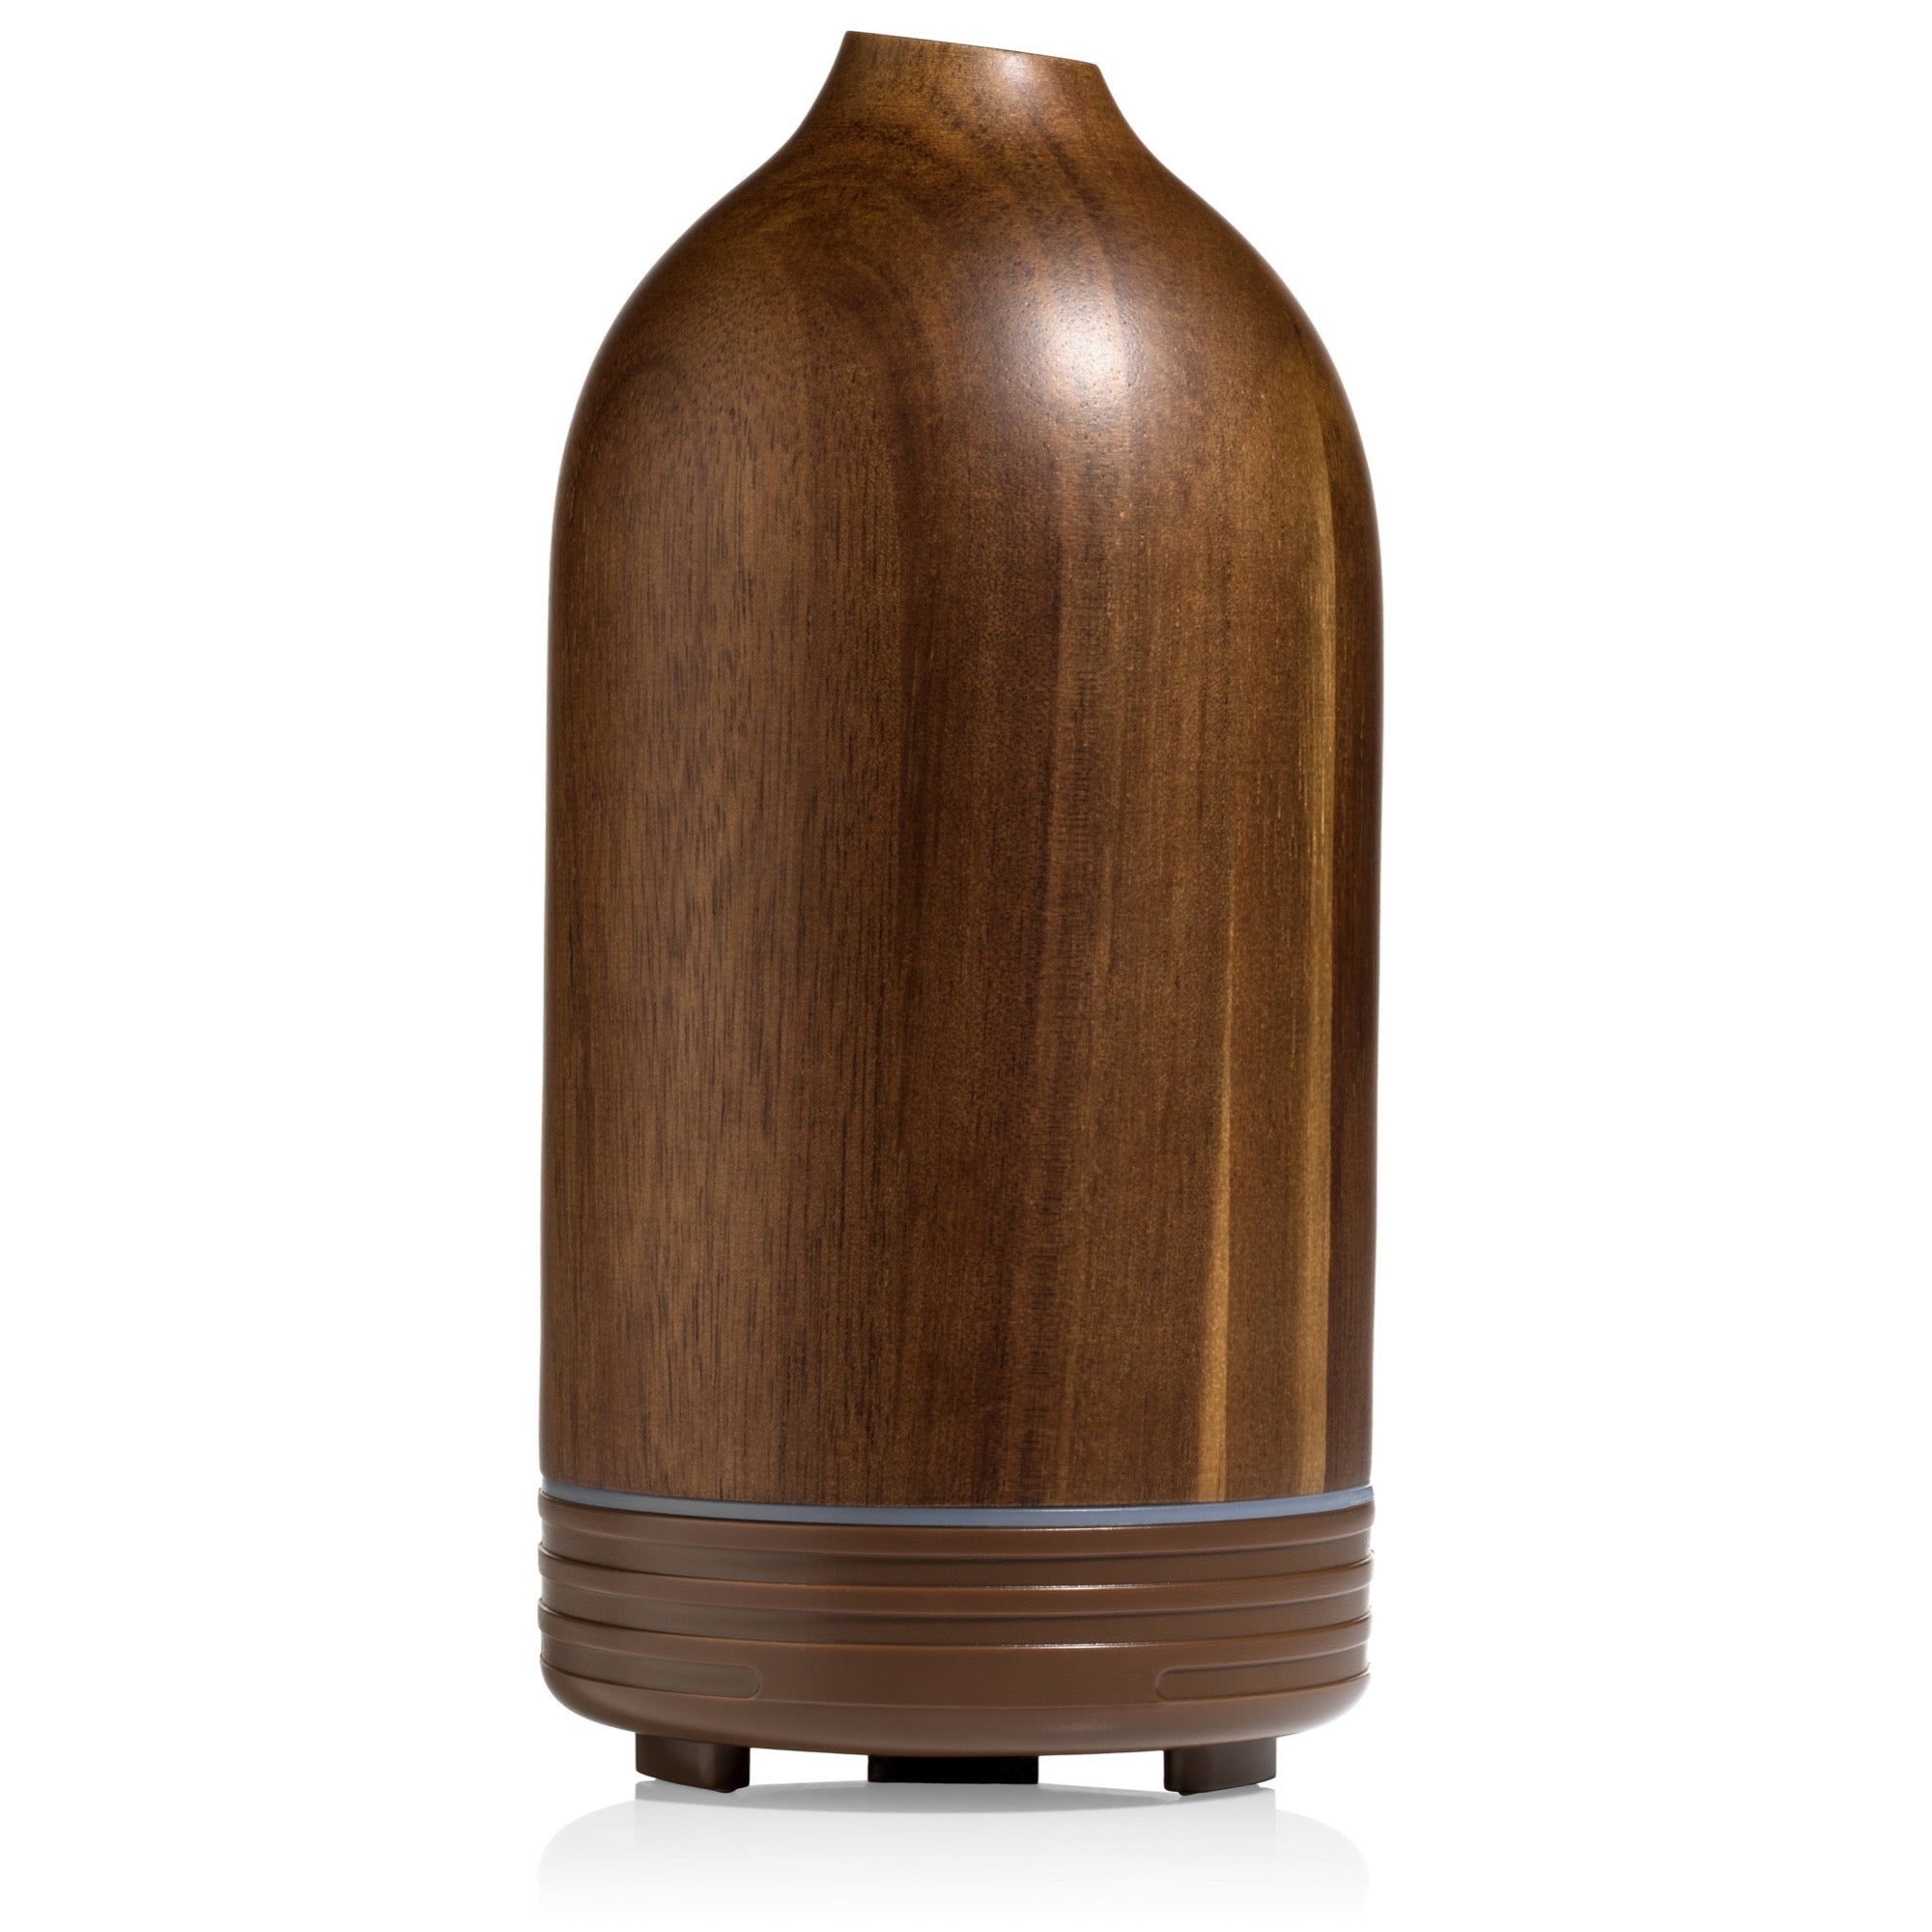 Campo Beauty Ultrasonic Essential Oil Diffuser - Natural WOOD cleanse the air naturally and create space to inspire, motivate, nurture and relax. This little piece of art streams pure essential oil mist to transform the mood and design of any space.  Breathe beauty with intention. Choose CAMPO pure essential oils intentionally to diffuse throughout your day to create your own rituals harnessing the power of scent association. 